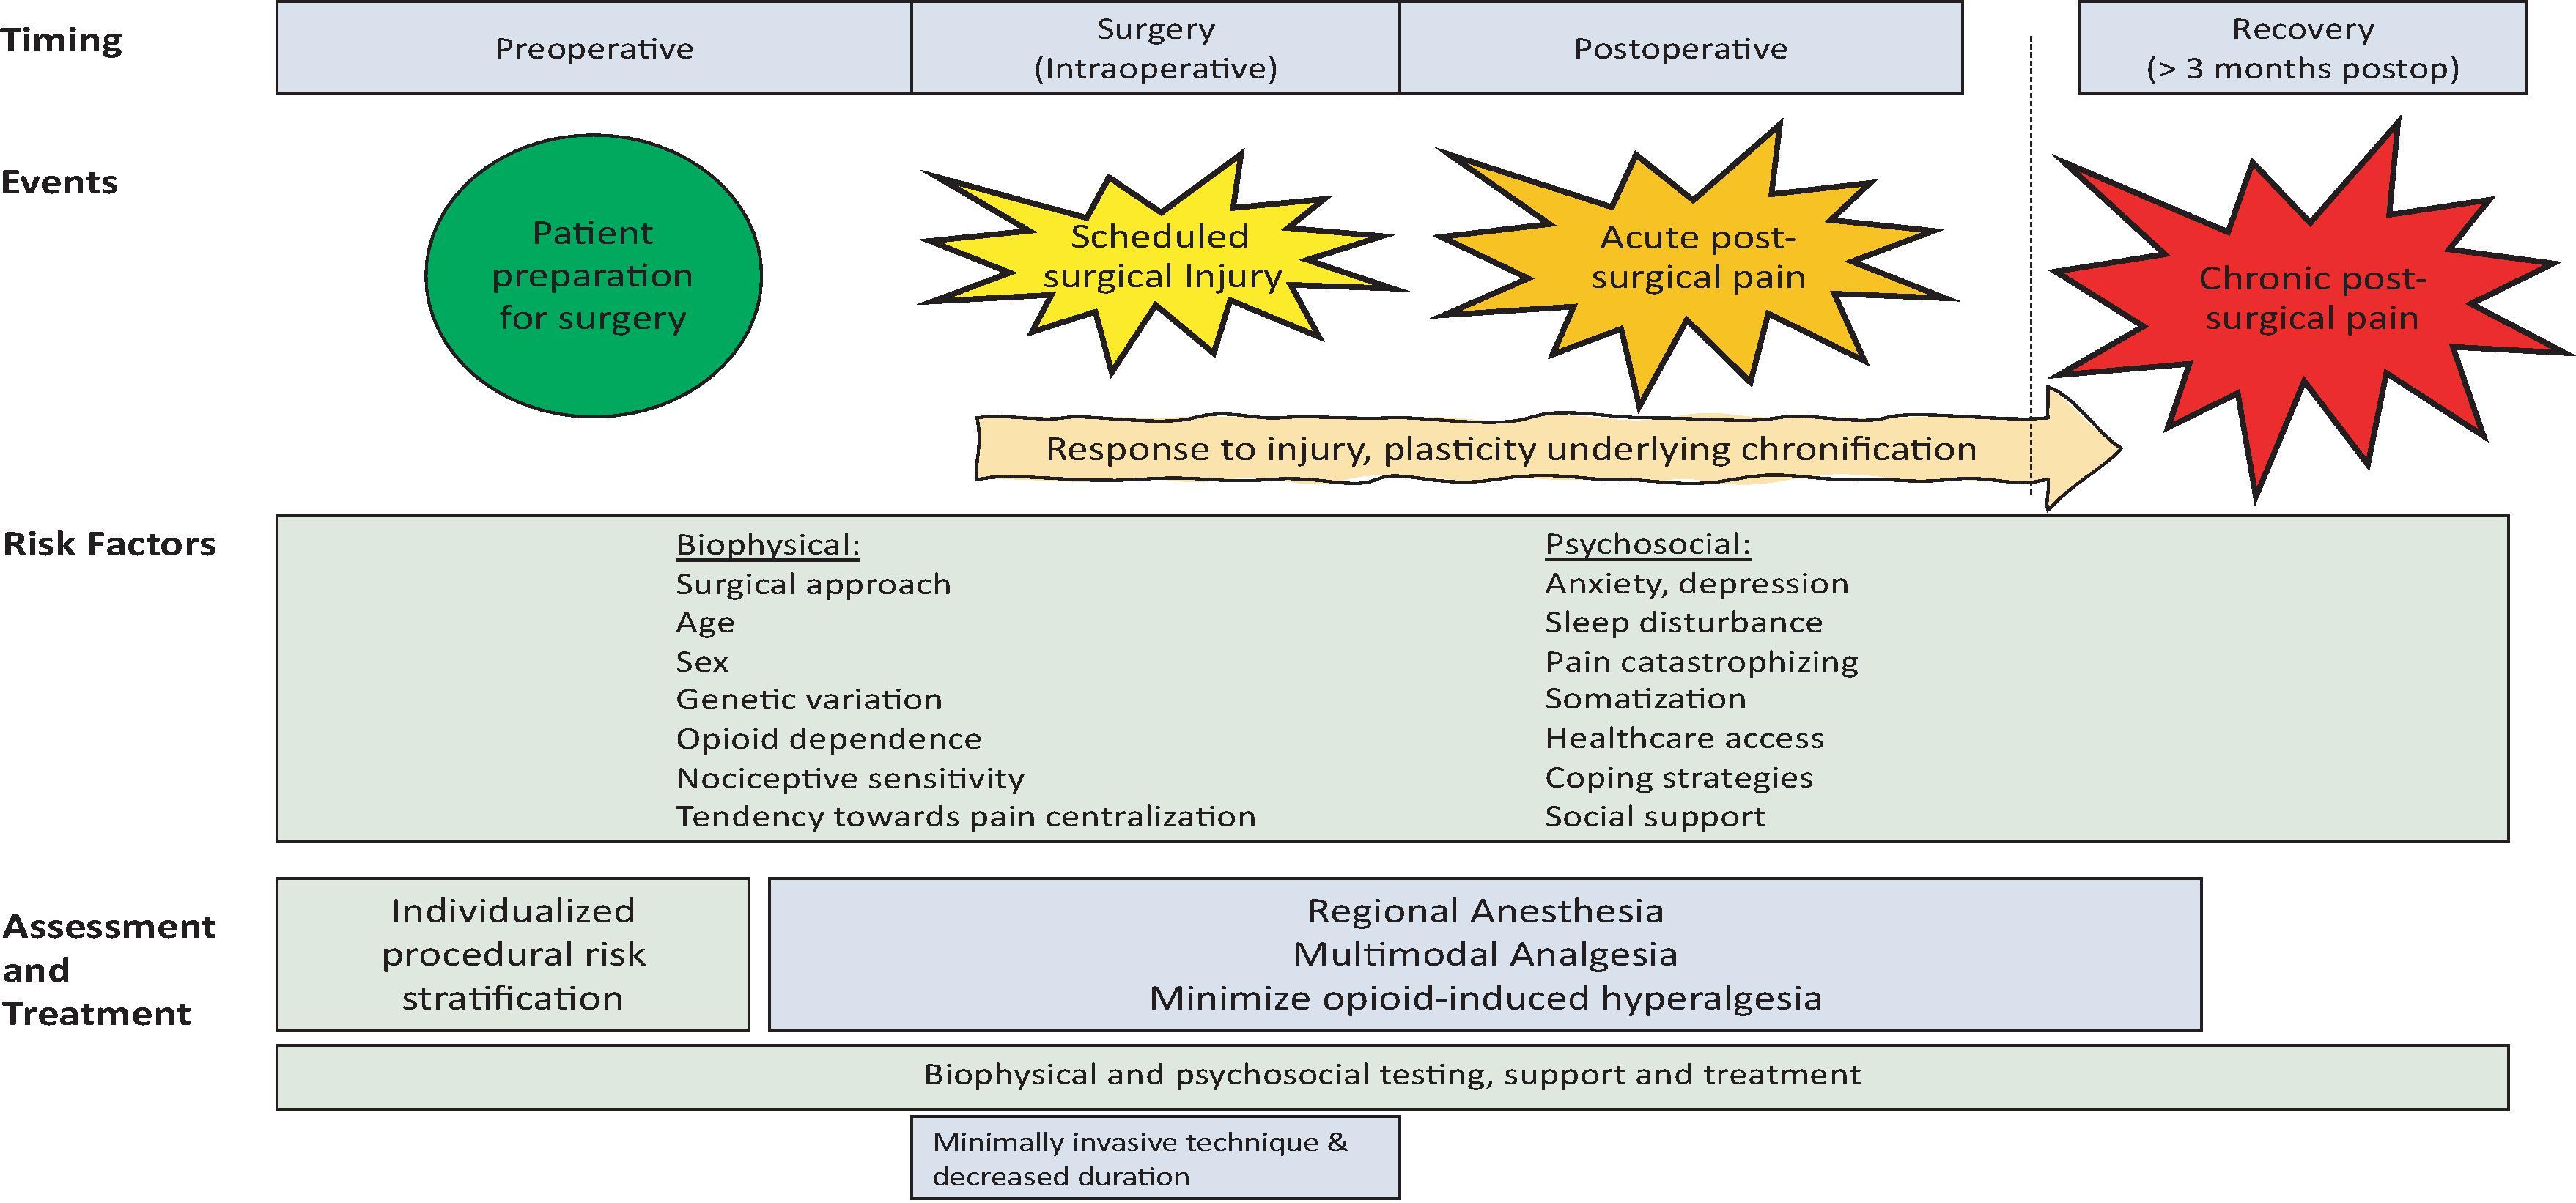 Figure 24.3The comprehensive risk factors in the biopsychosocial model for developing chronic post-surgical pain. Chen Y-YK, Boden KA, Schreiber KL. The role of regional anaesthesia and multimodal analgesia in the prevention of chronic post-surgical pain: a narrative review. Anaesthesia . 2021;76(1):8–17. 45